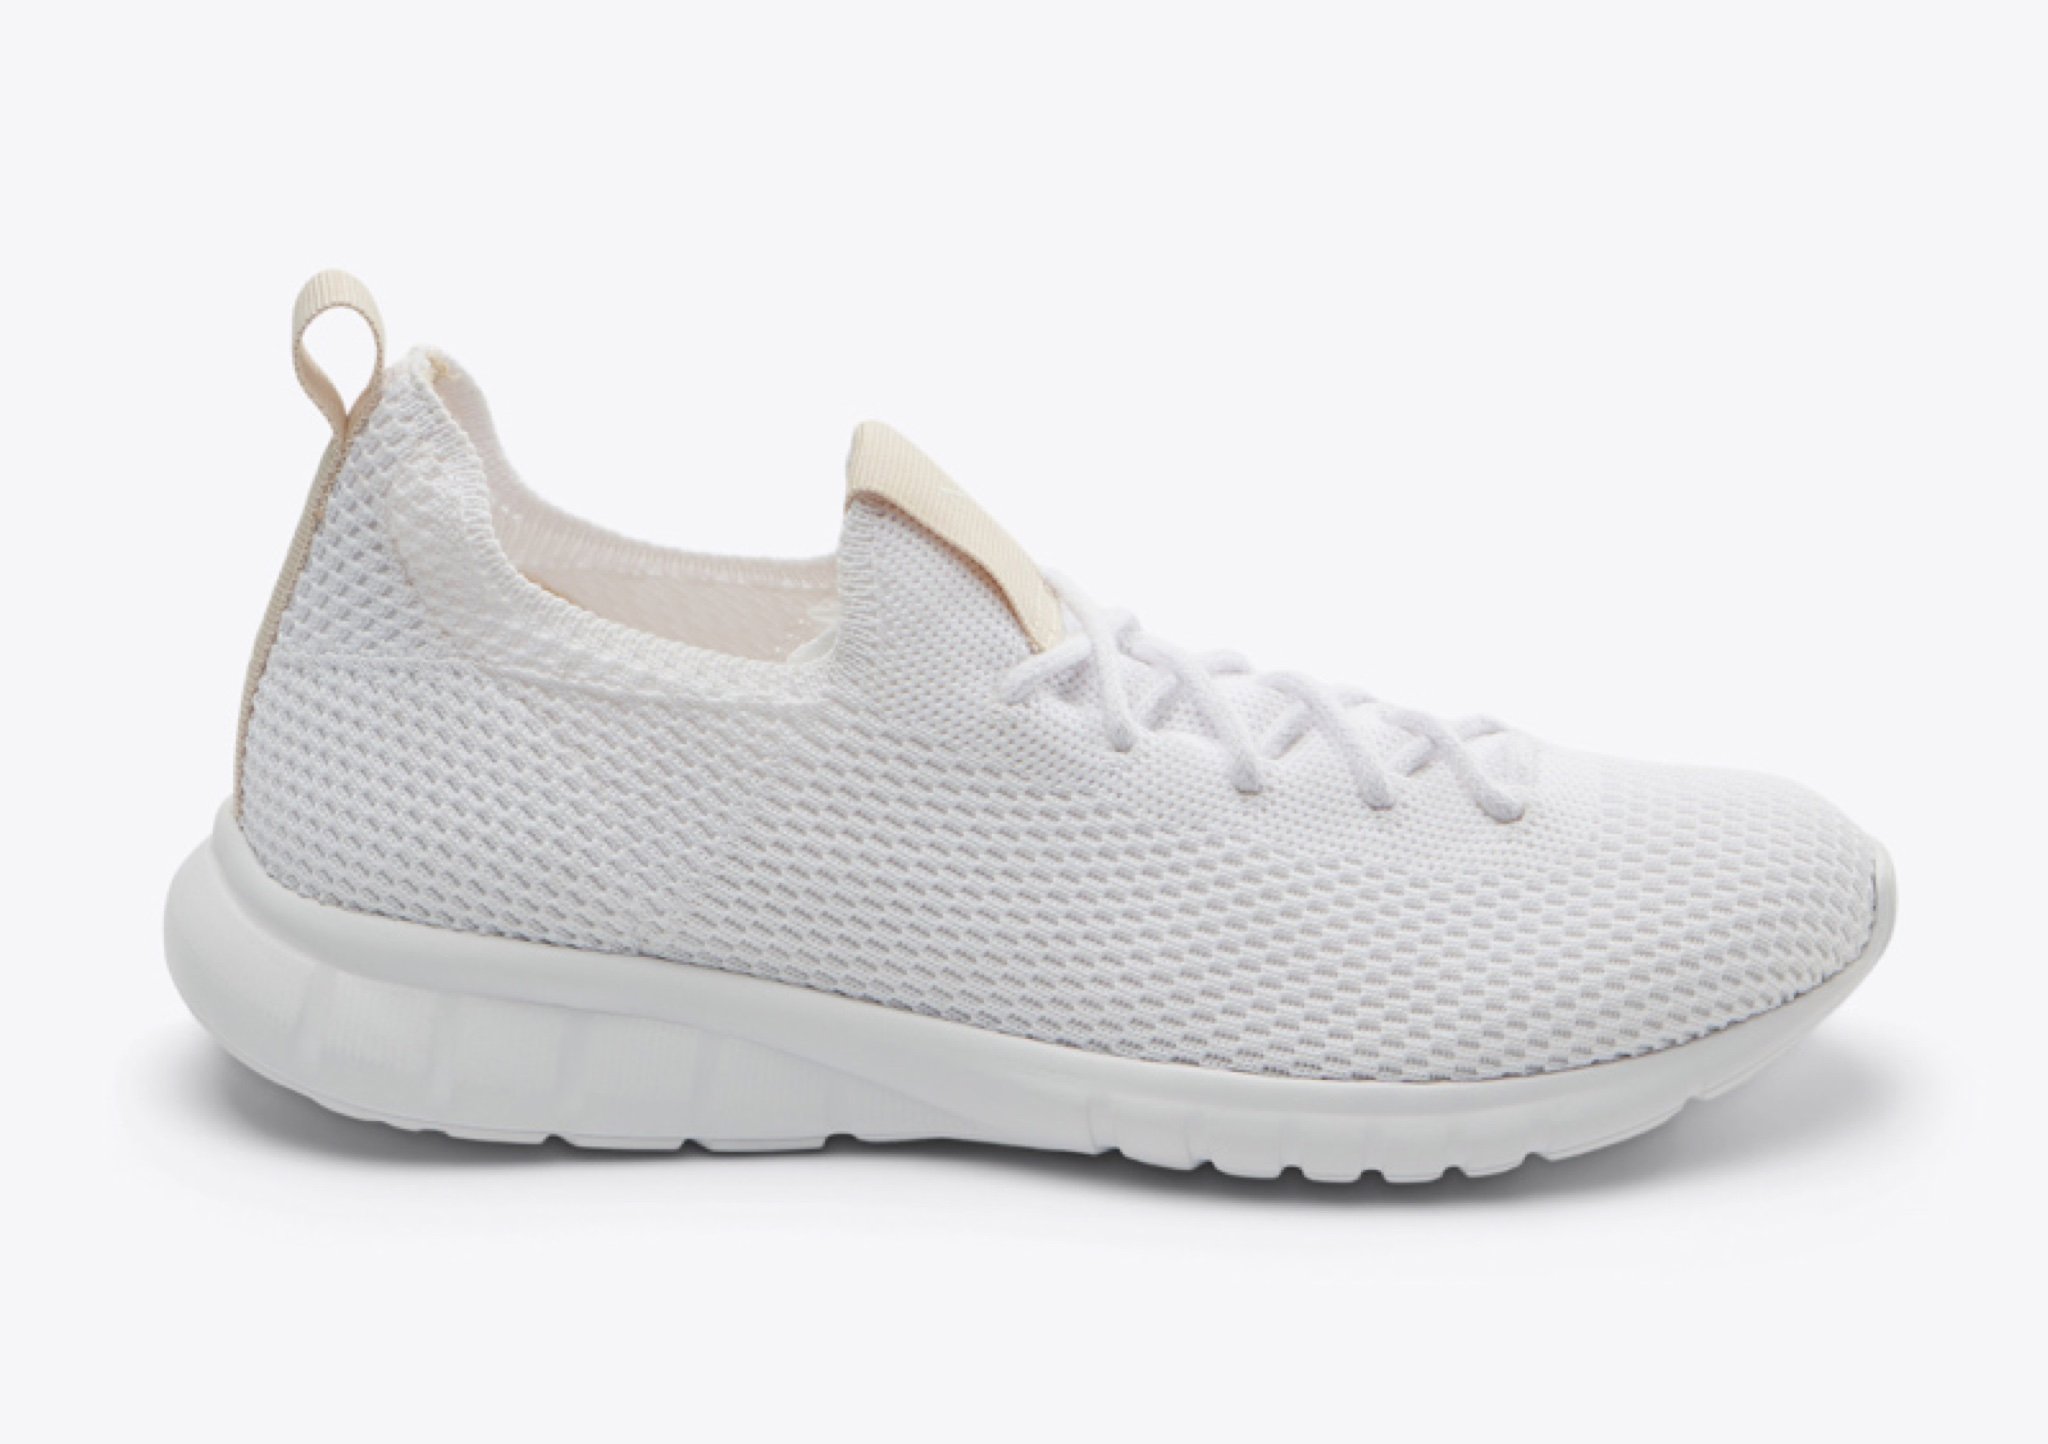 Nisolo Women's Athleisure Eco-Knit Sneaker White - Every Nisolo product is built on the foundation of comfort, function, and design. 